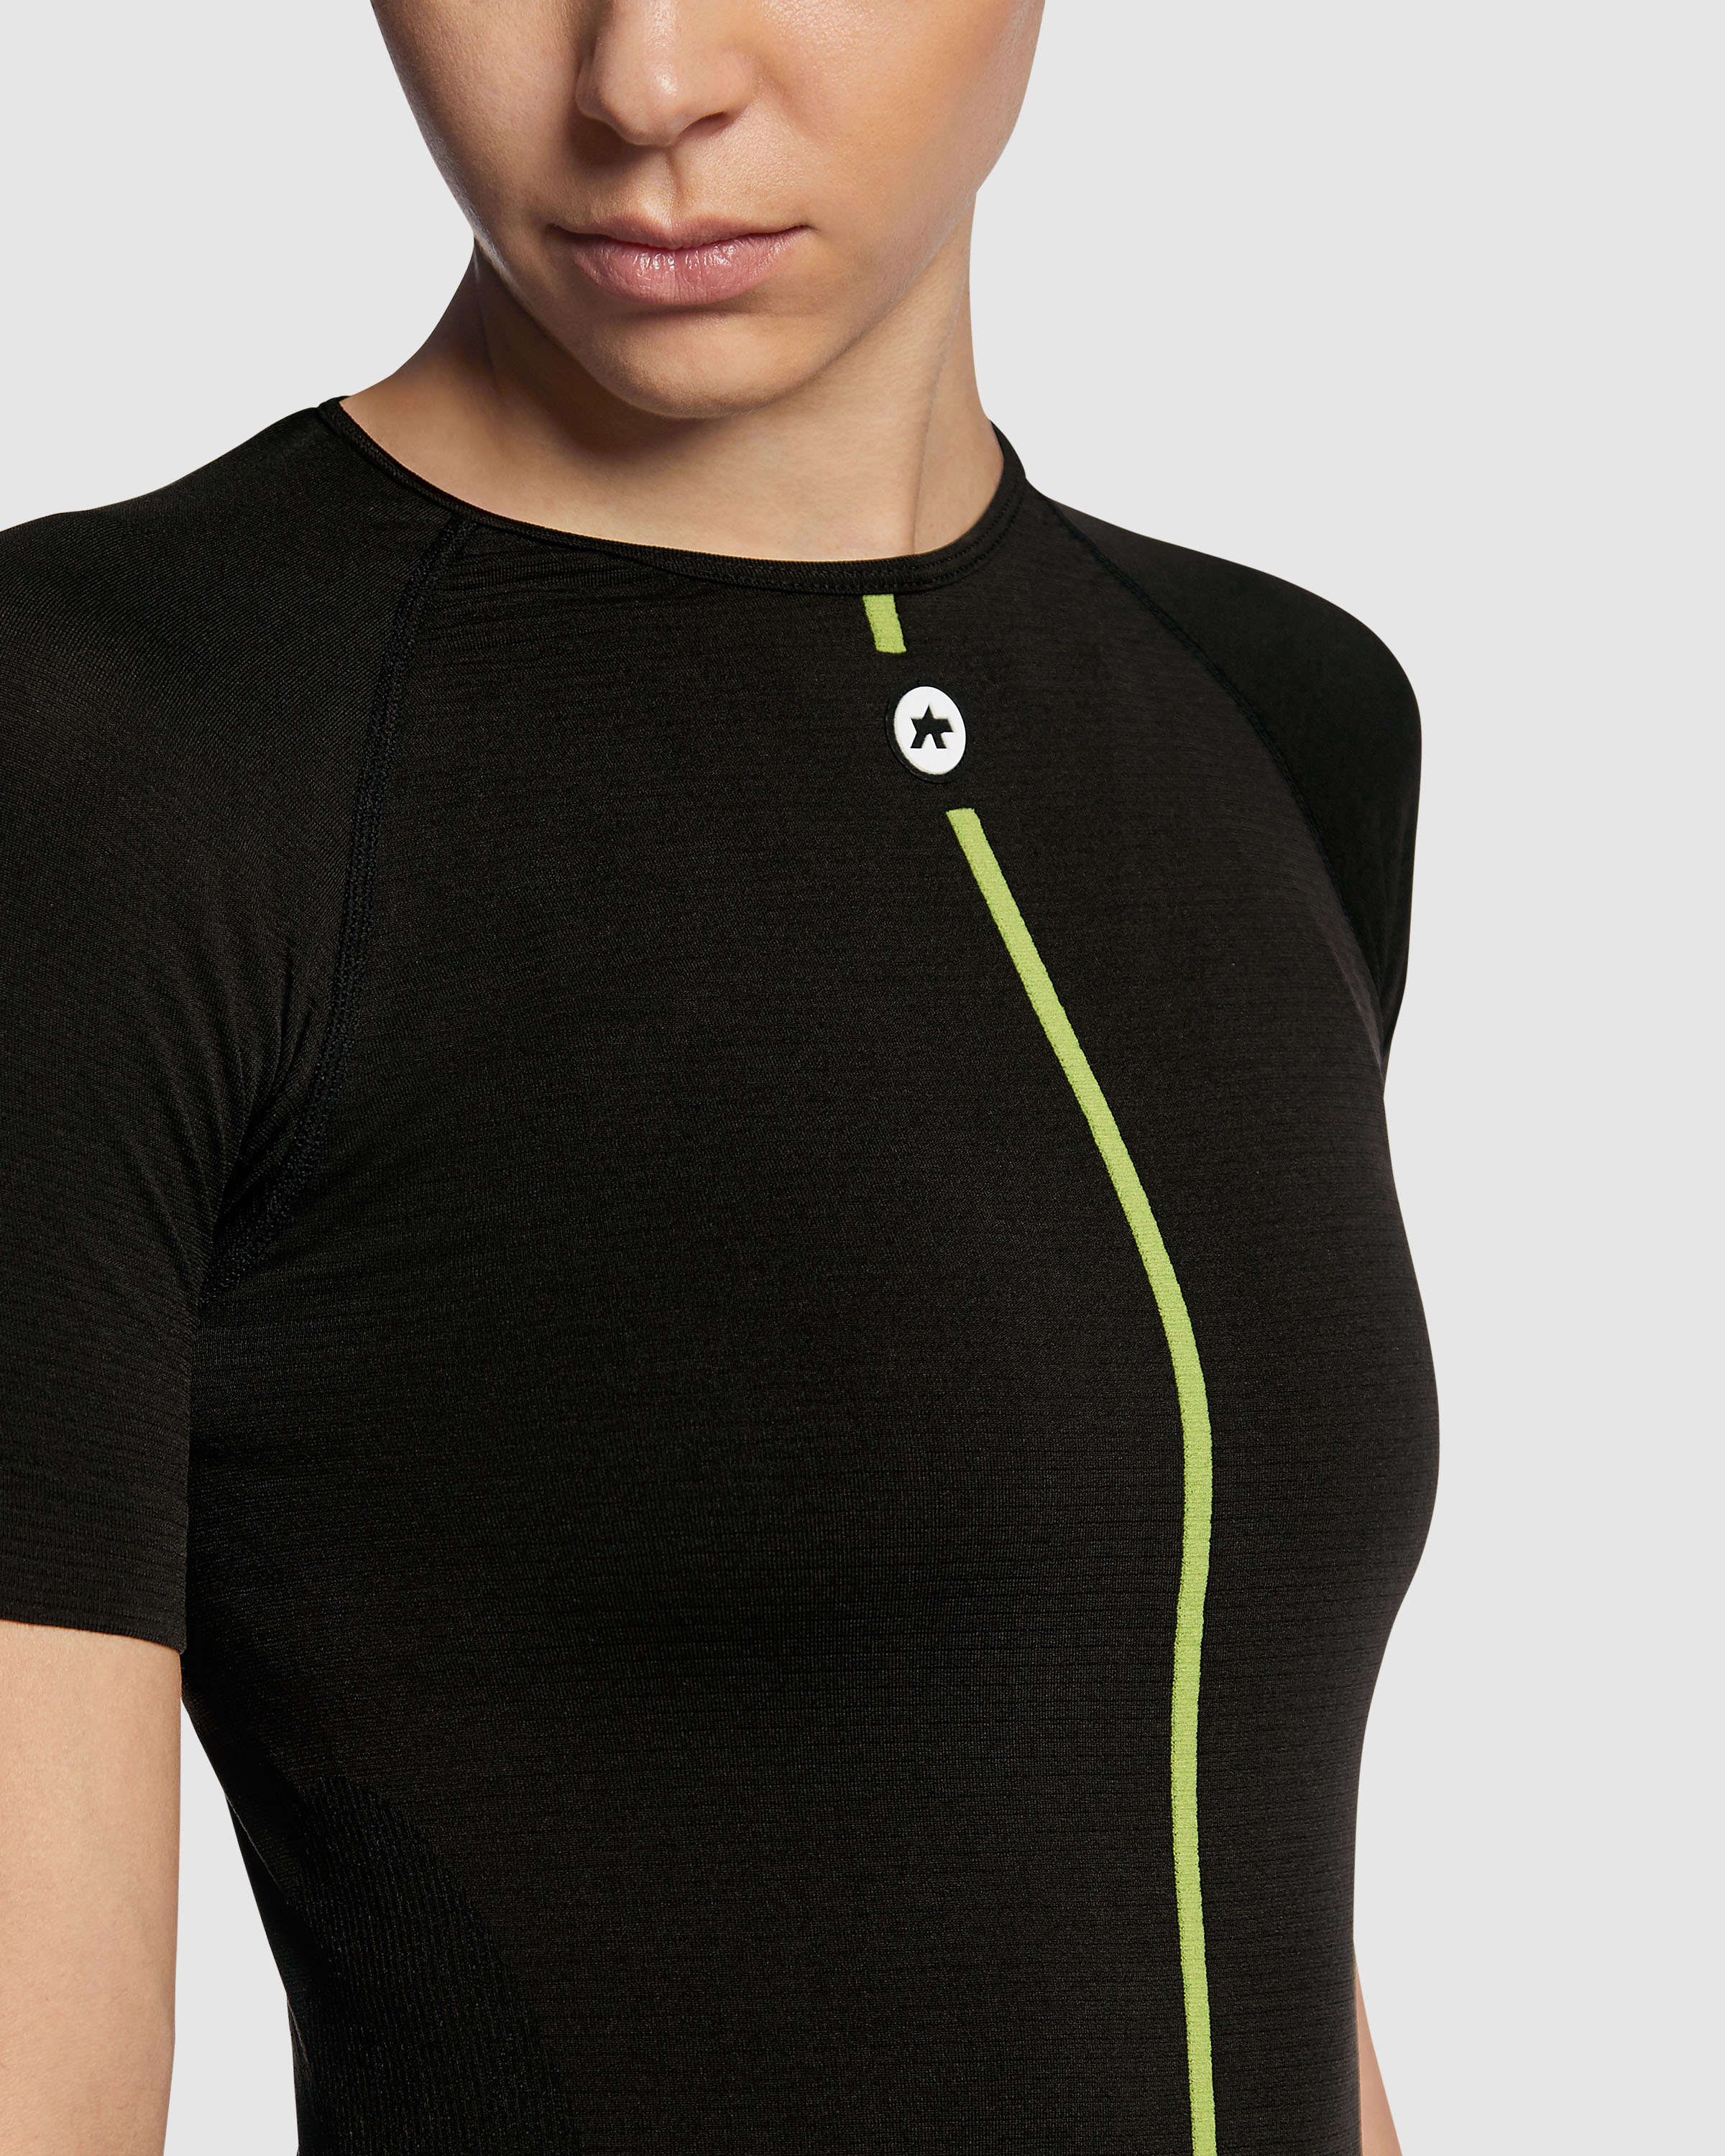 Women’s Spring Fall SS Skin Layer - ASSOS Of Switzerland - Official Outlet